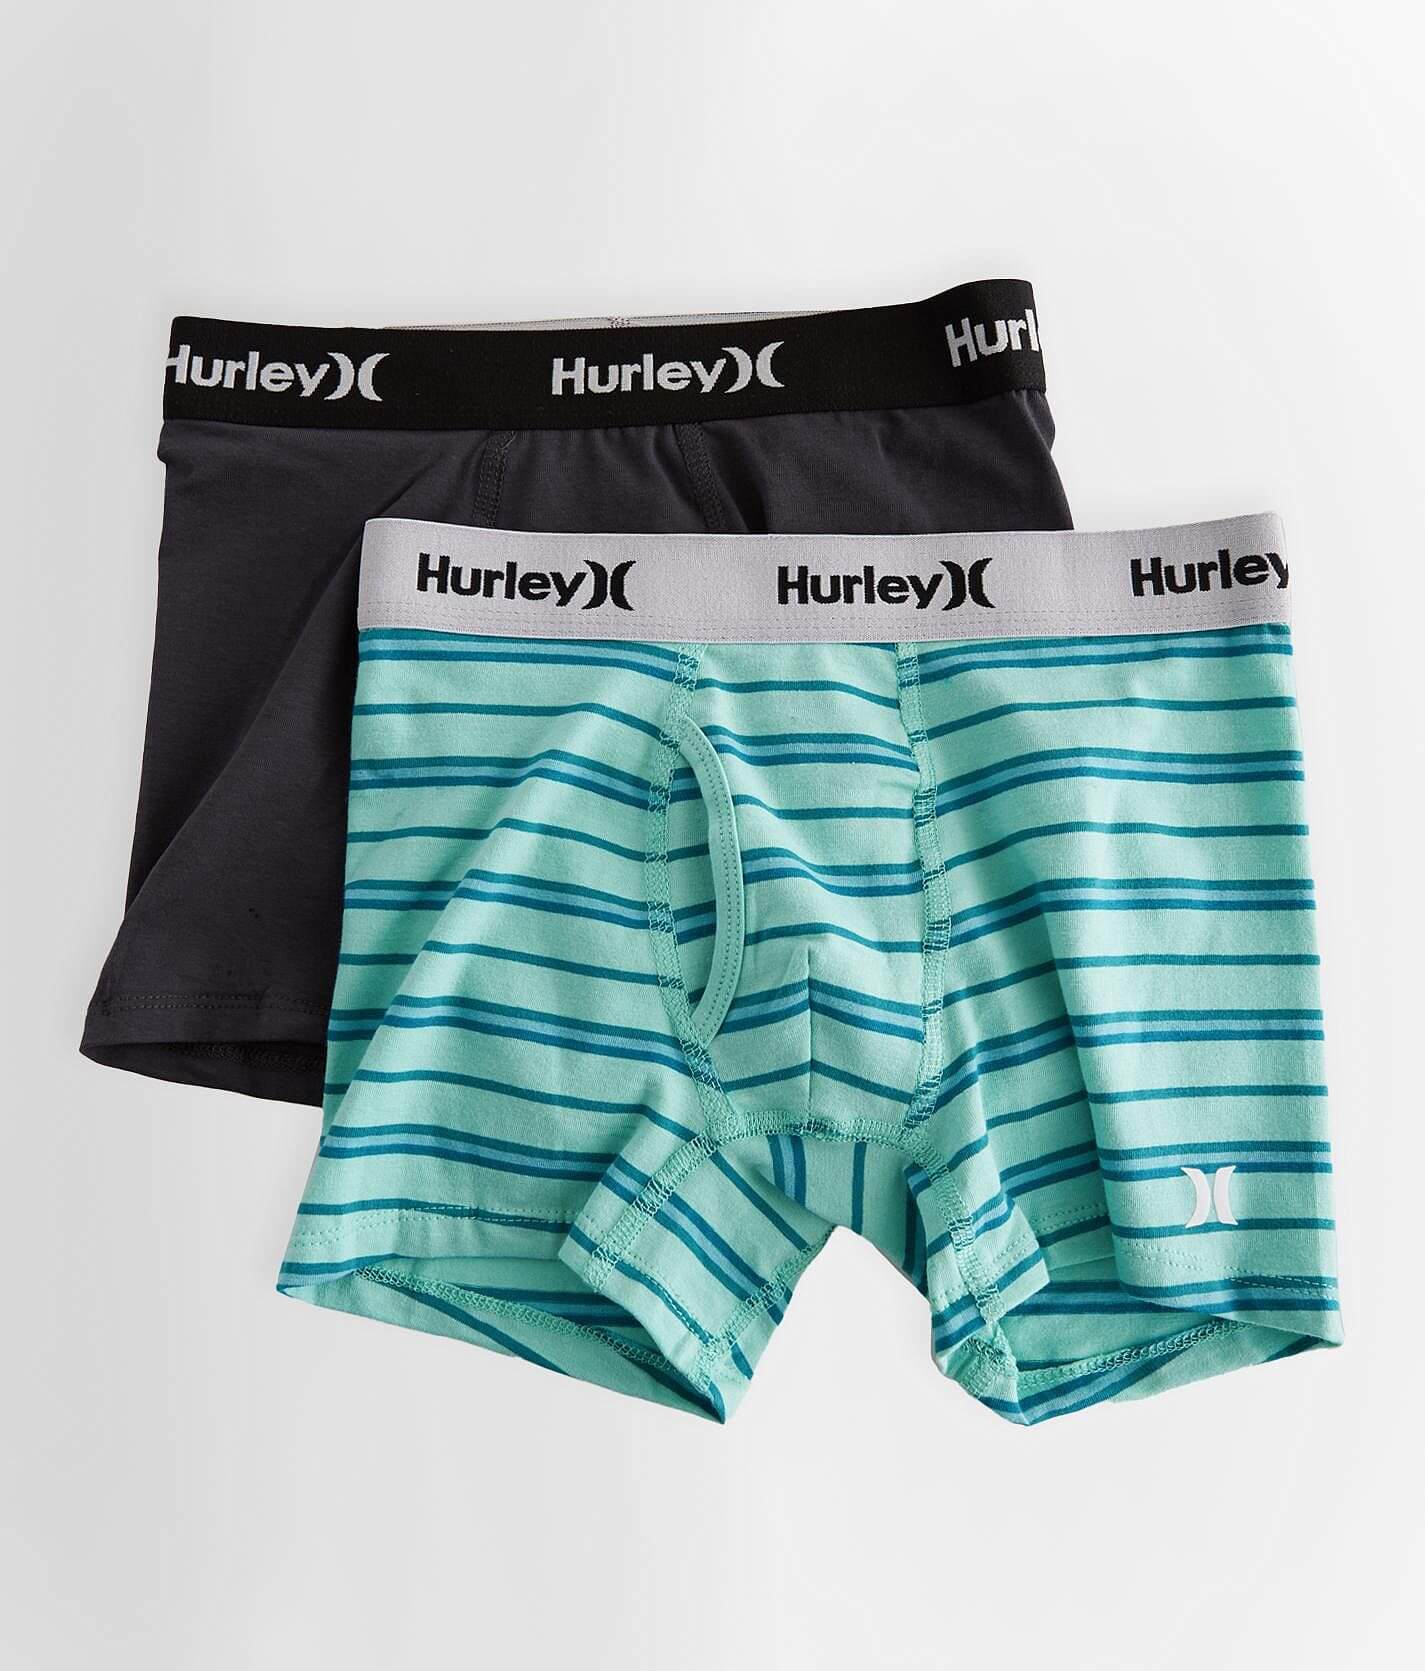 Hurley Men's Large Boxer Briefs Performance Athletic, Blue Assorted, 4 Pack  - Helia Beer Co